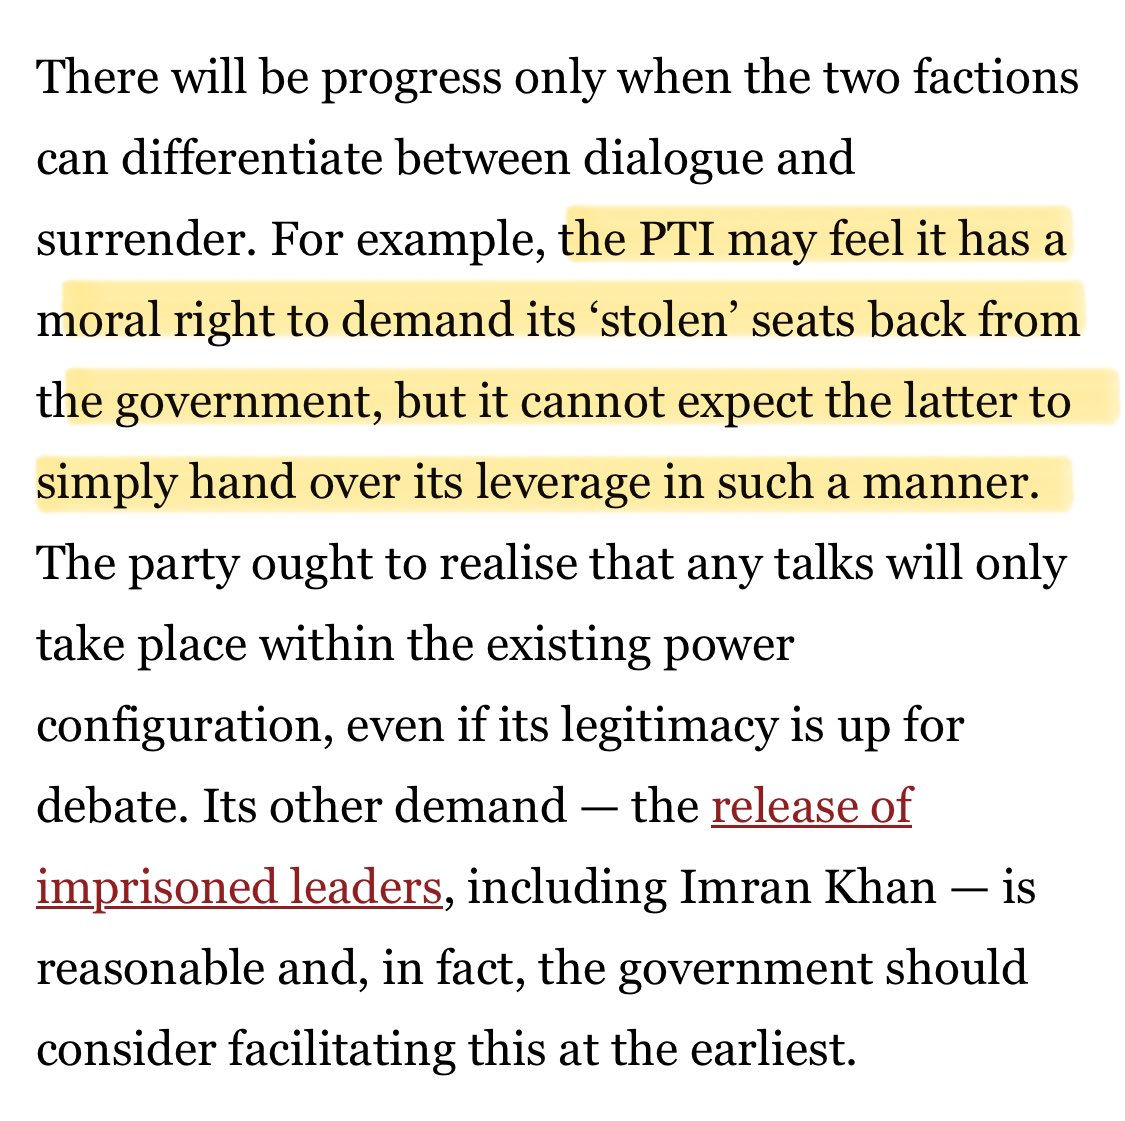 “Pity” is the word I’d use for people of Pakistan, where the country’s top editorial publishes such bullshit to legitimise blatant robbery of people’s mandate.